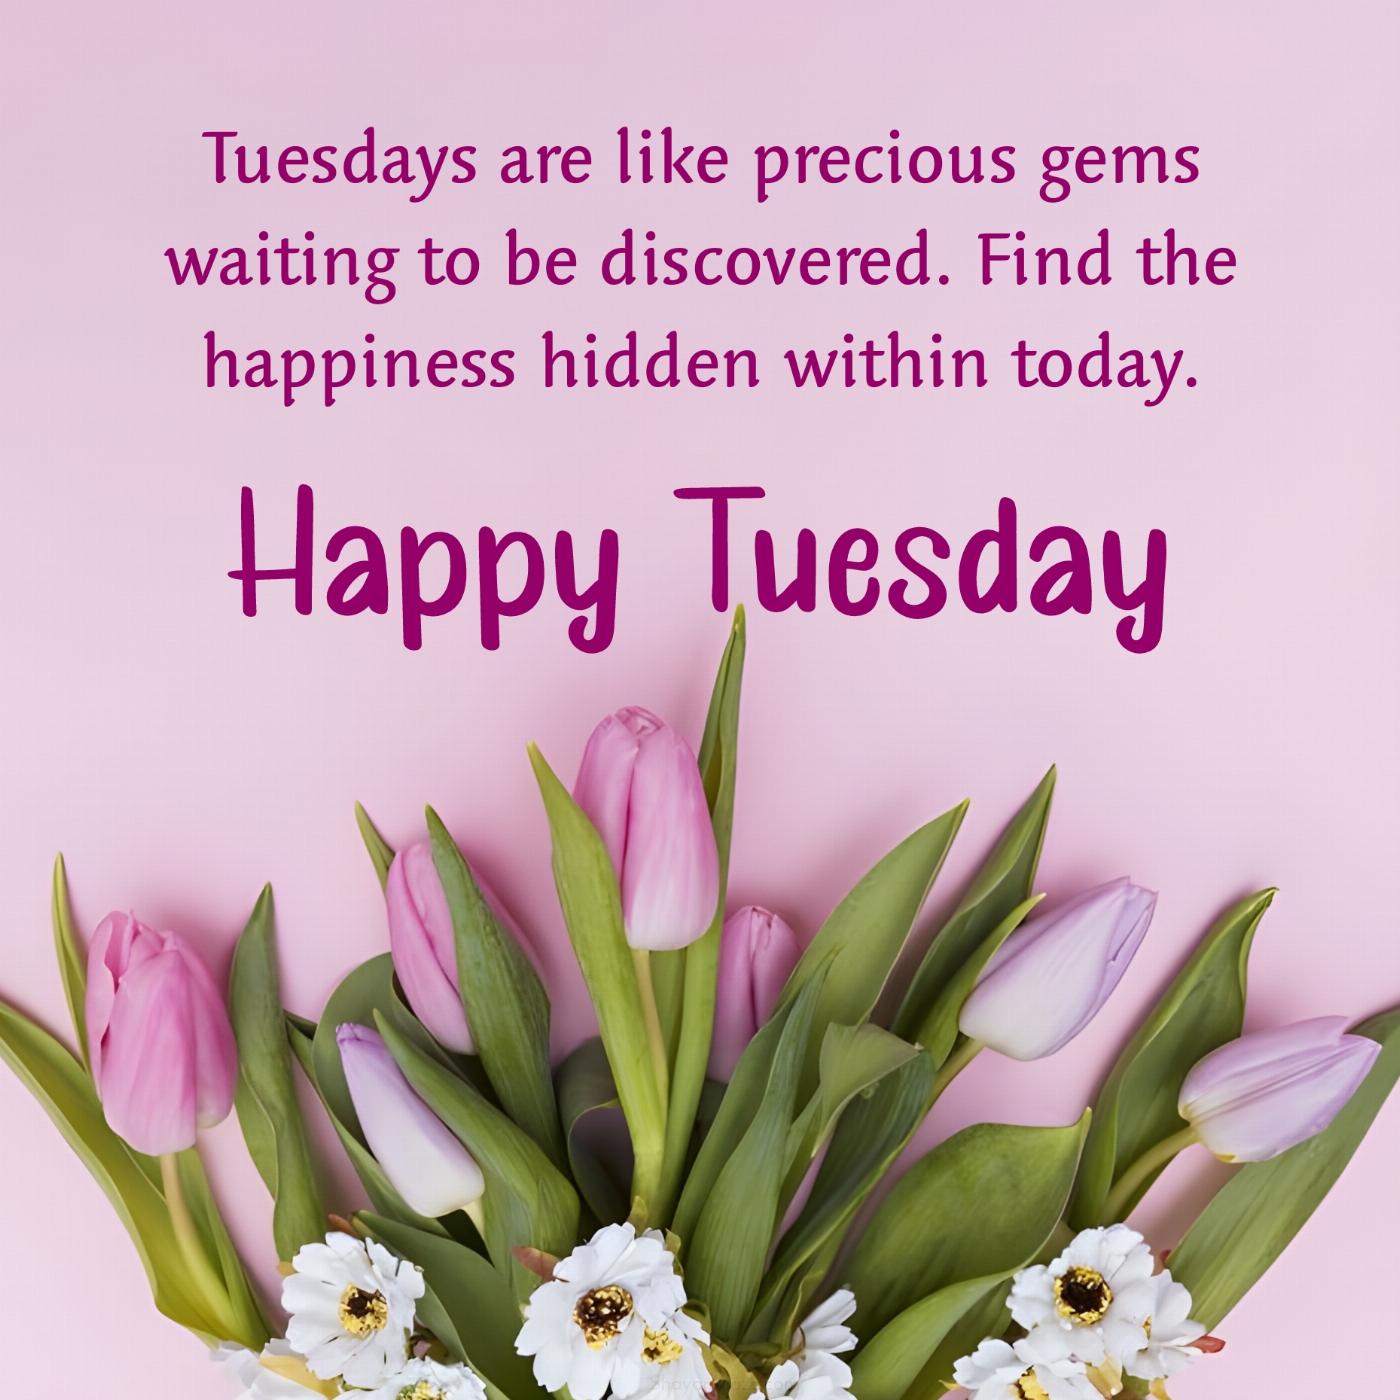 Tuesdays are like precious gems waiting to be discovered